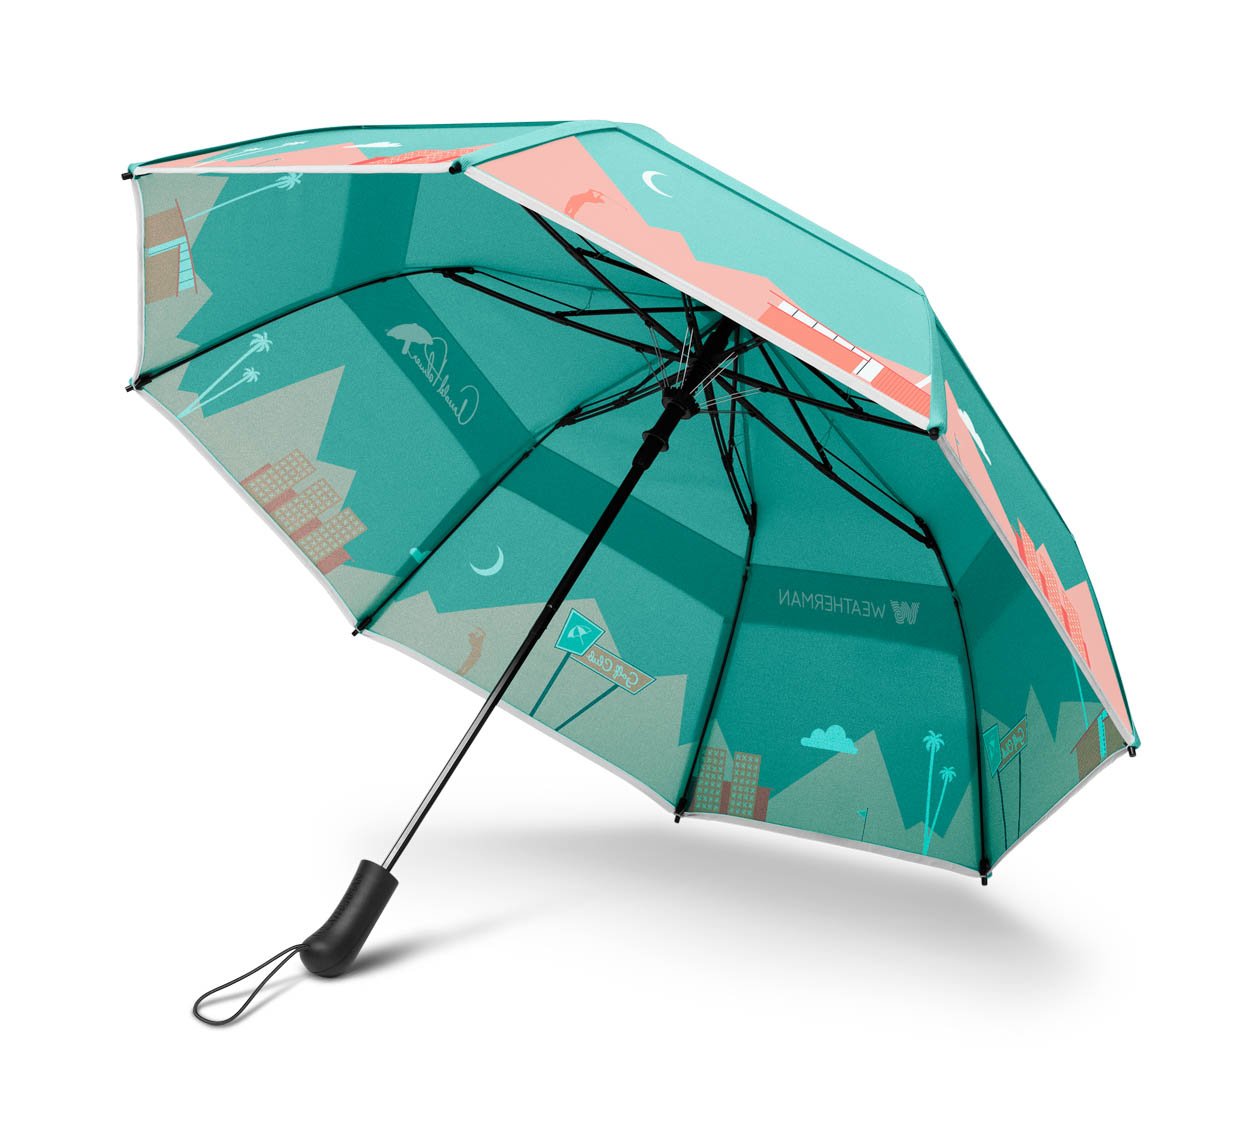 Weatherman's Arnold Palmer Umbrellas Look Great on the Golf Course